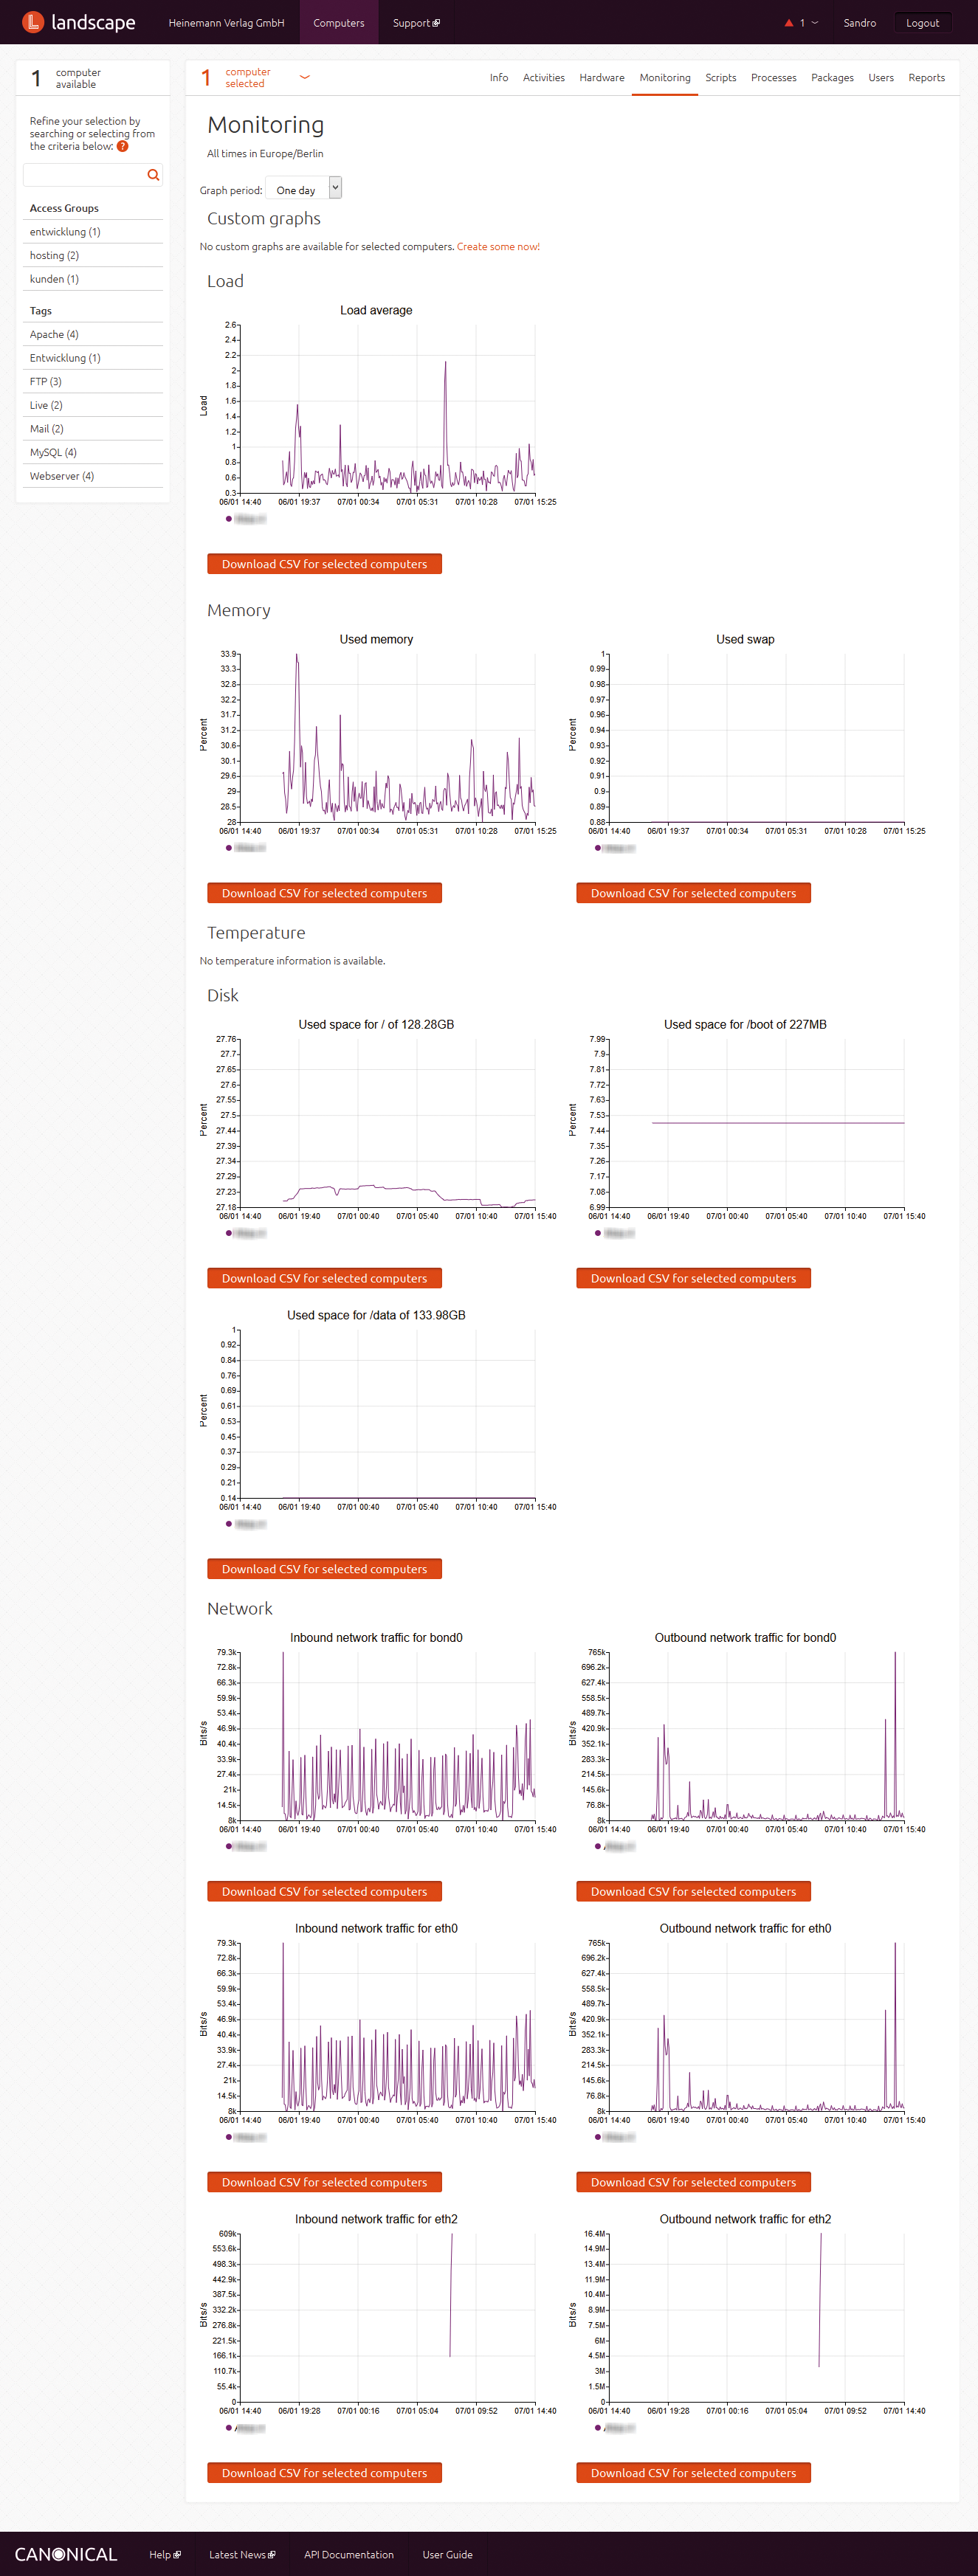 Monitoring reveals the machine's status, and you can use shell scripts for custom monitoring. 